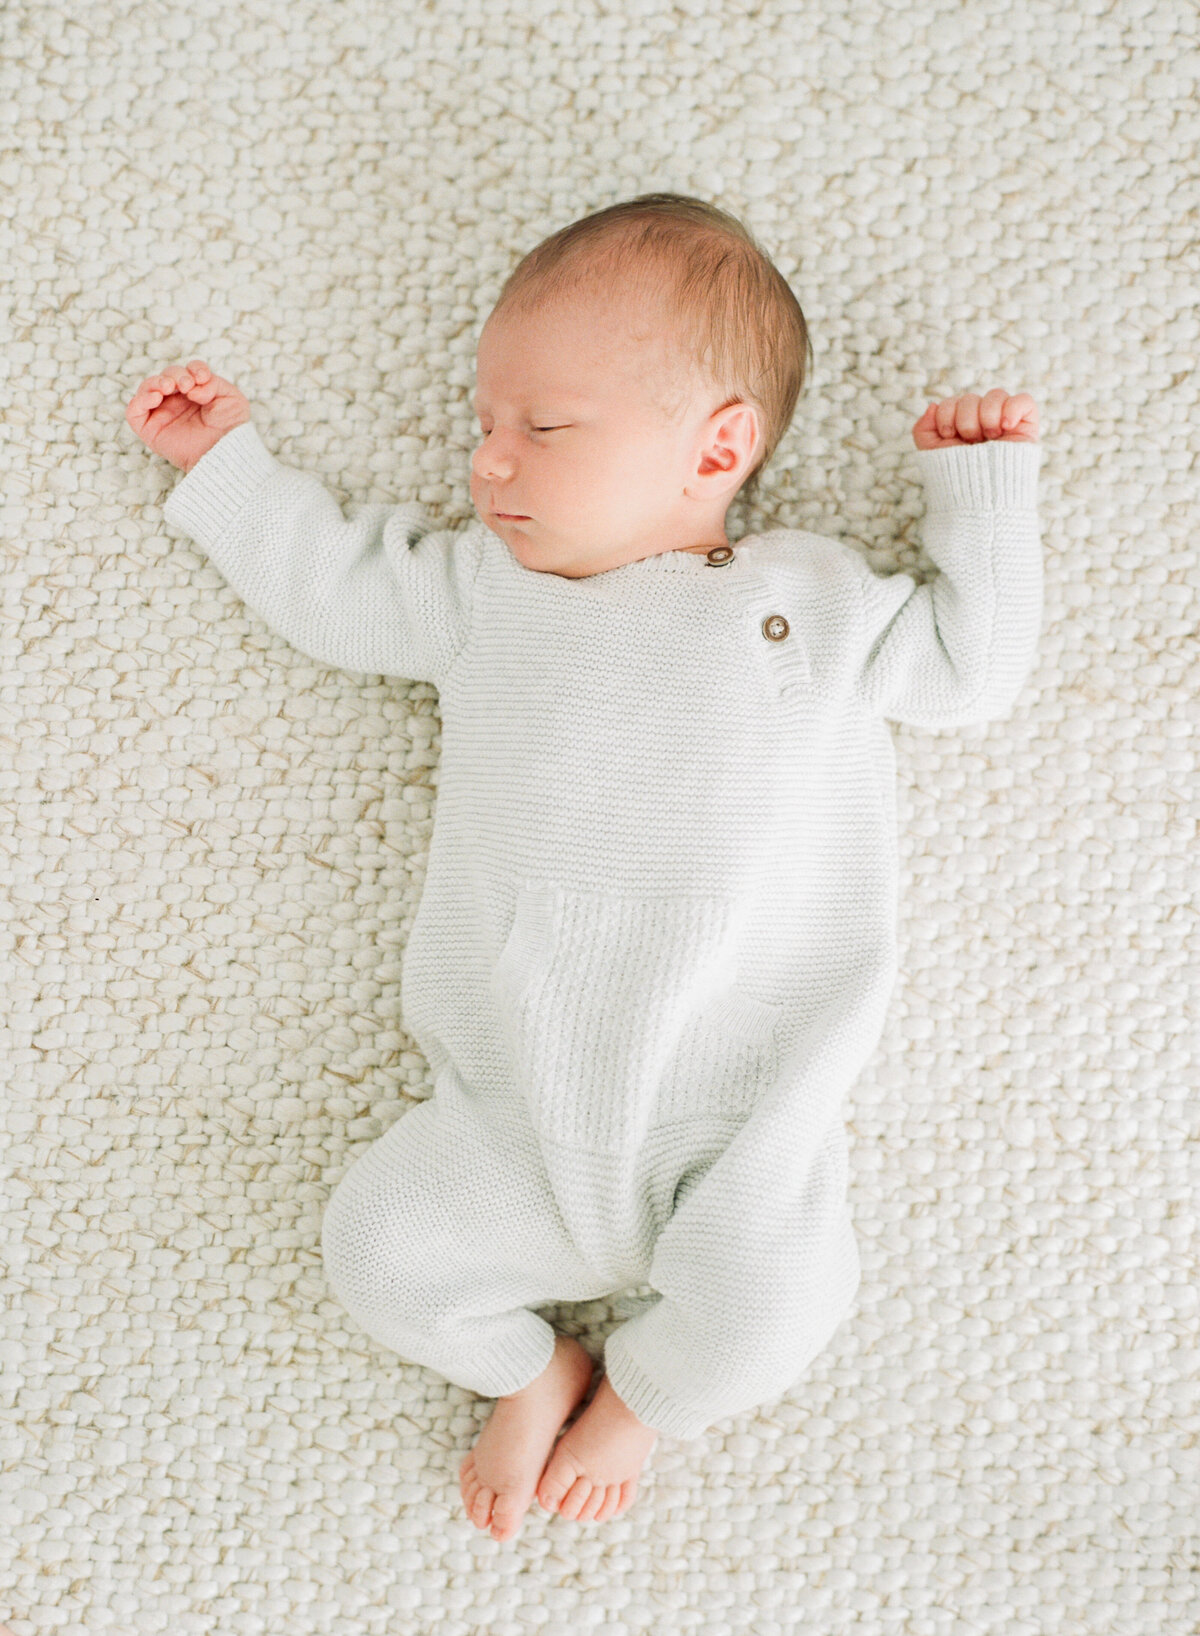 Baby lies on a textured blanket and sleeps while wearing a white newborn outfit during his Raleigh NC newborn session. Photo by Raleigh Newborn Photography A.J. Dunlap Photography.